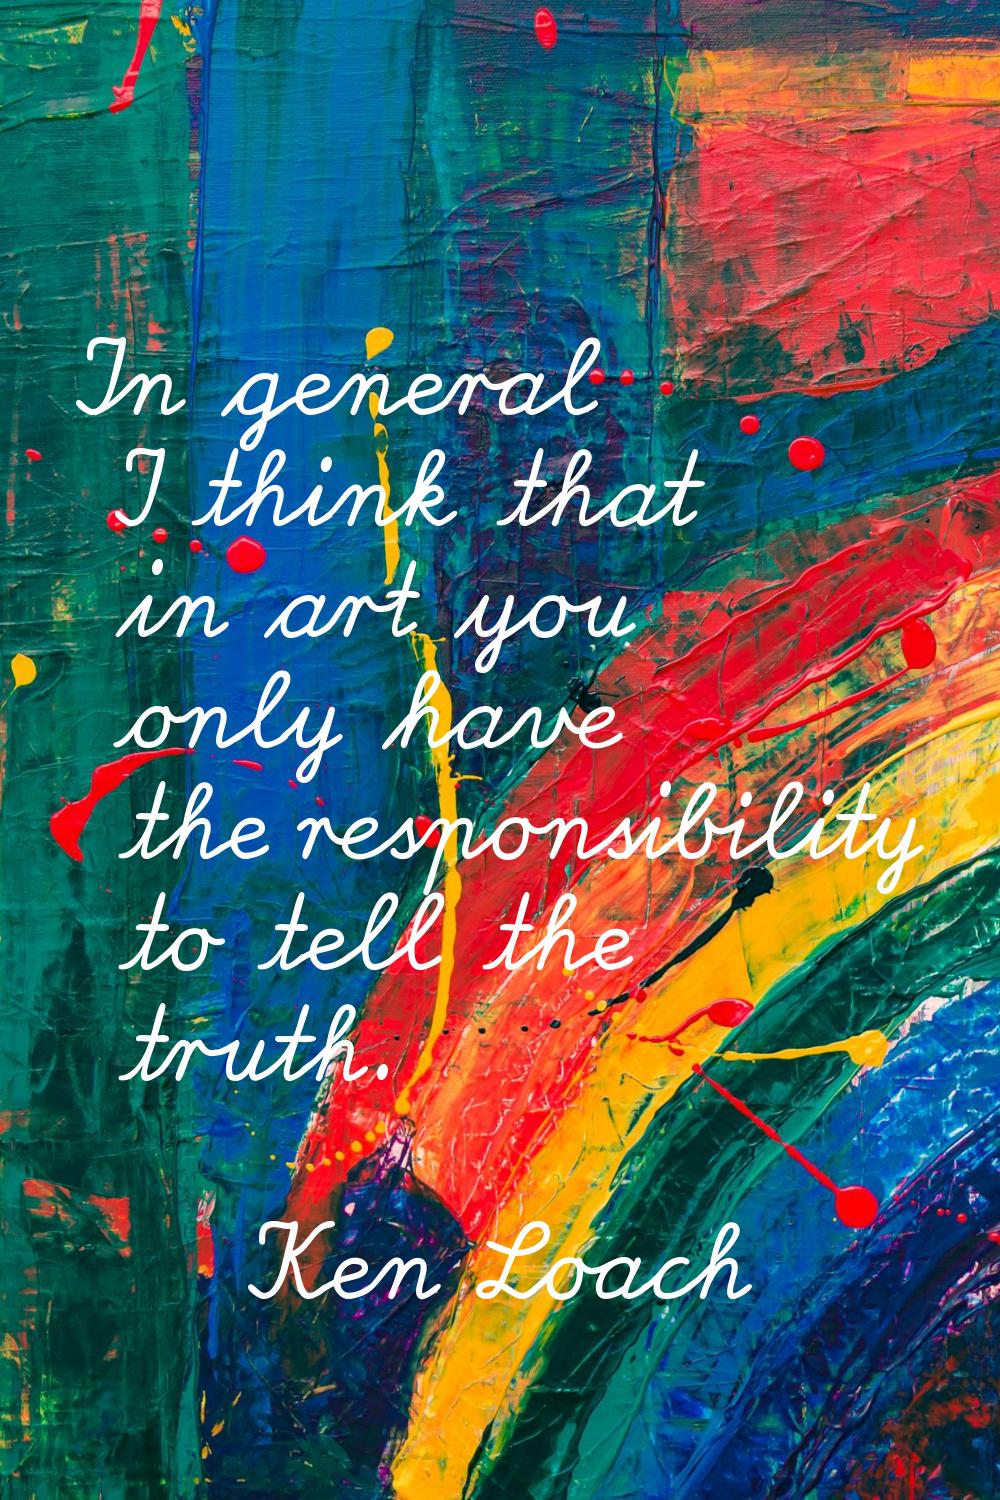 In general I think that in art you only have the responsibility to tell the truth.